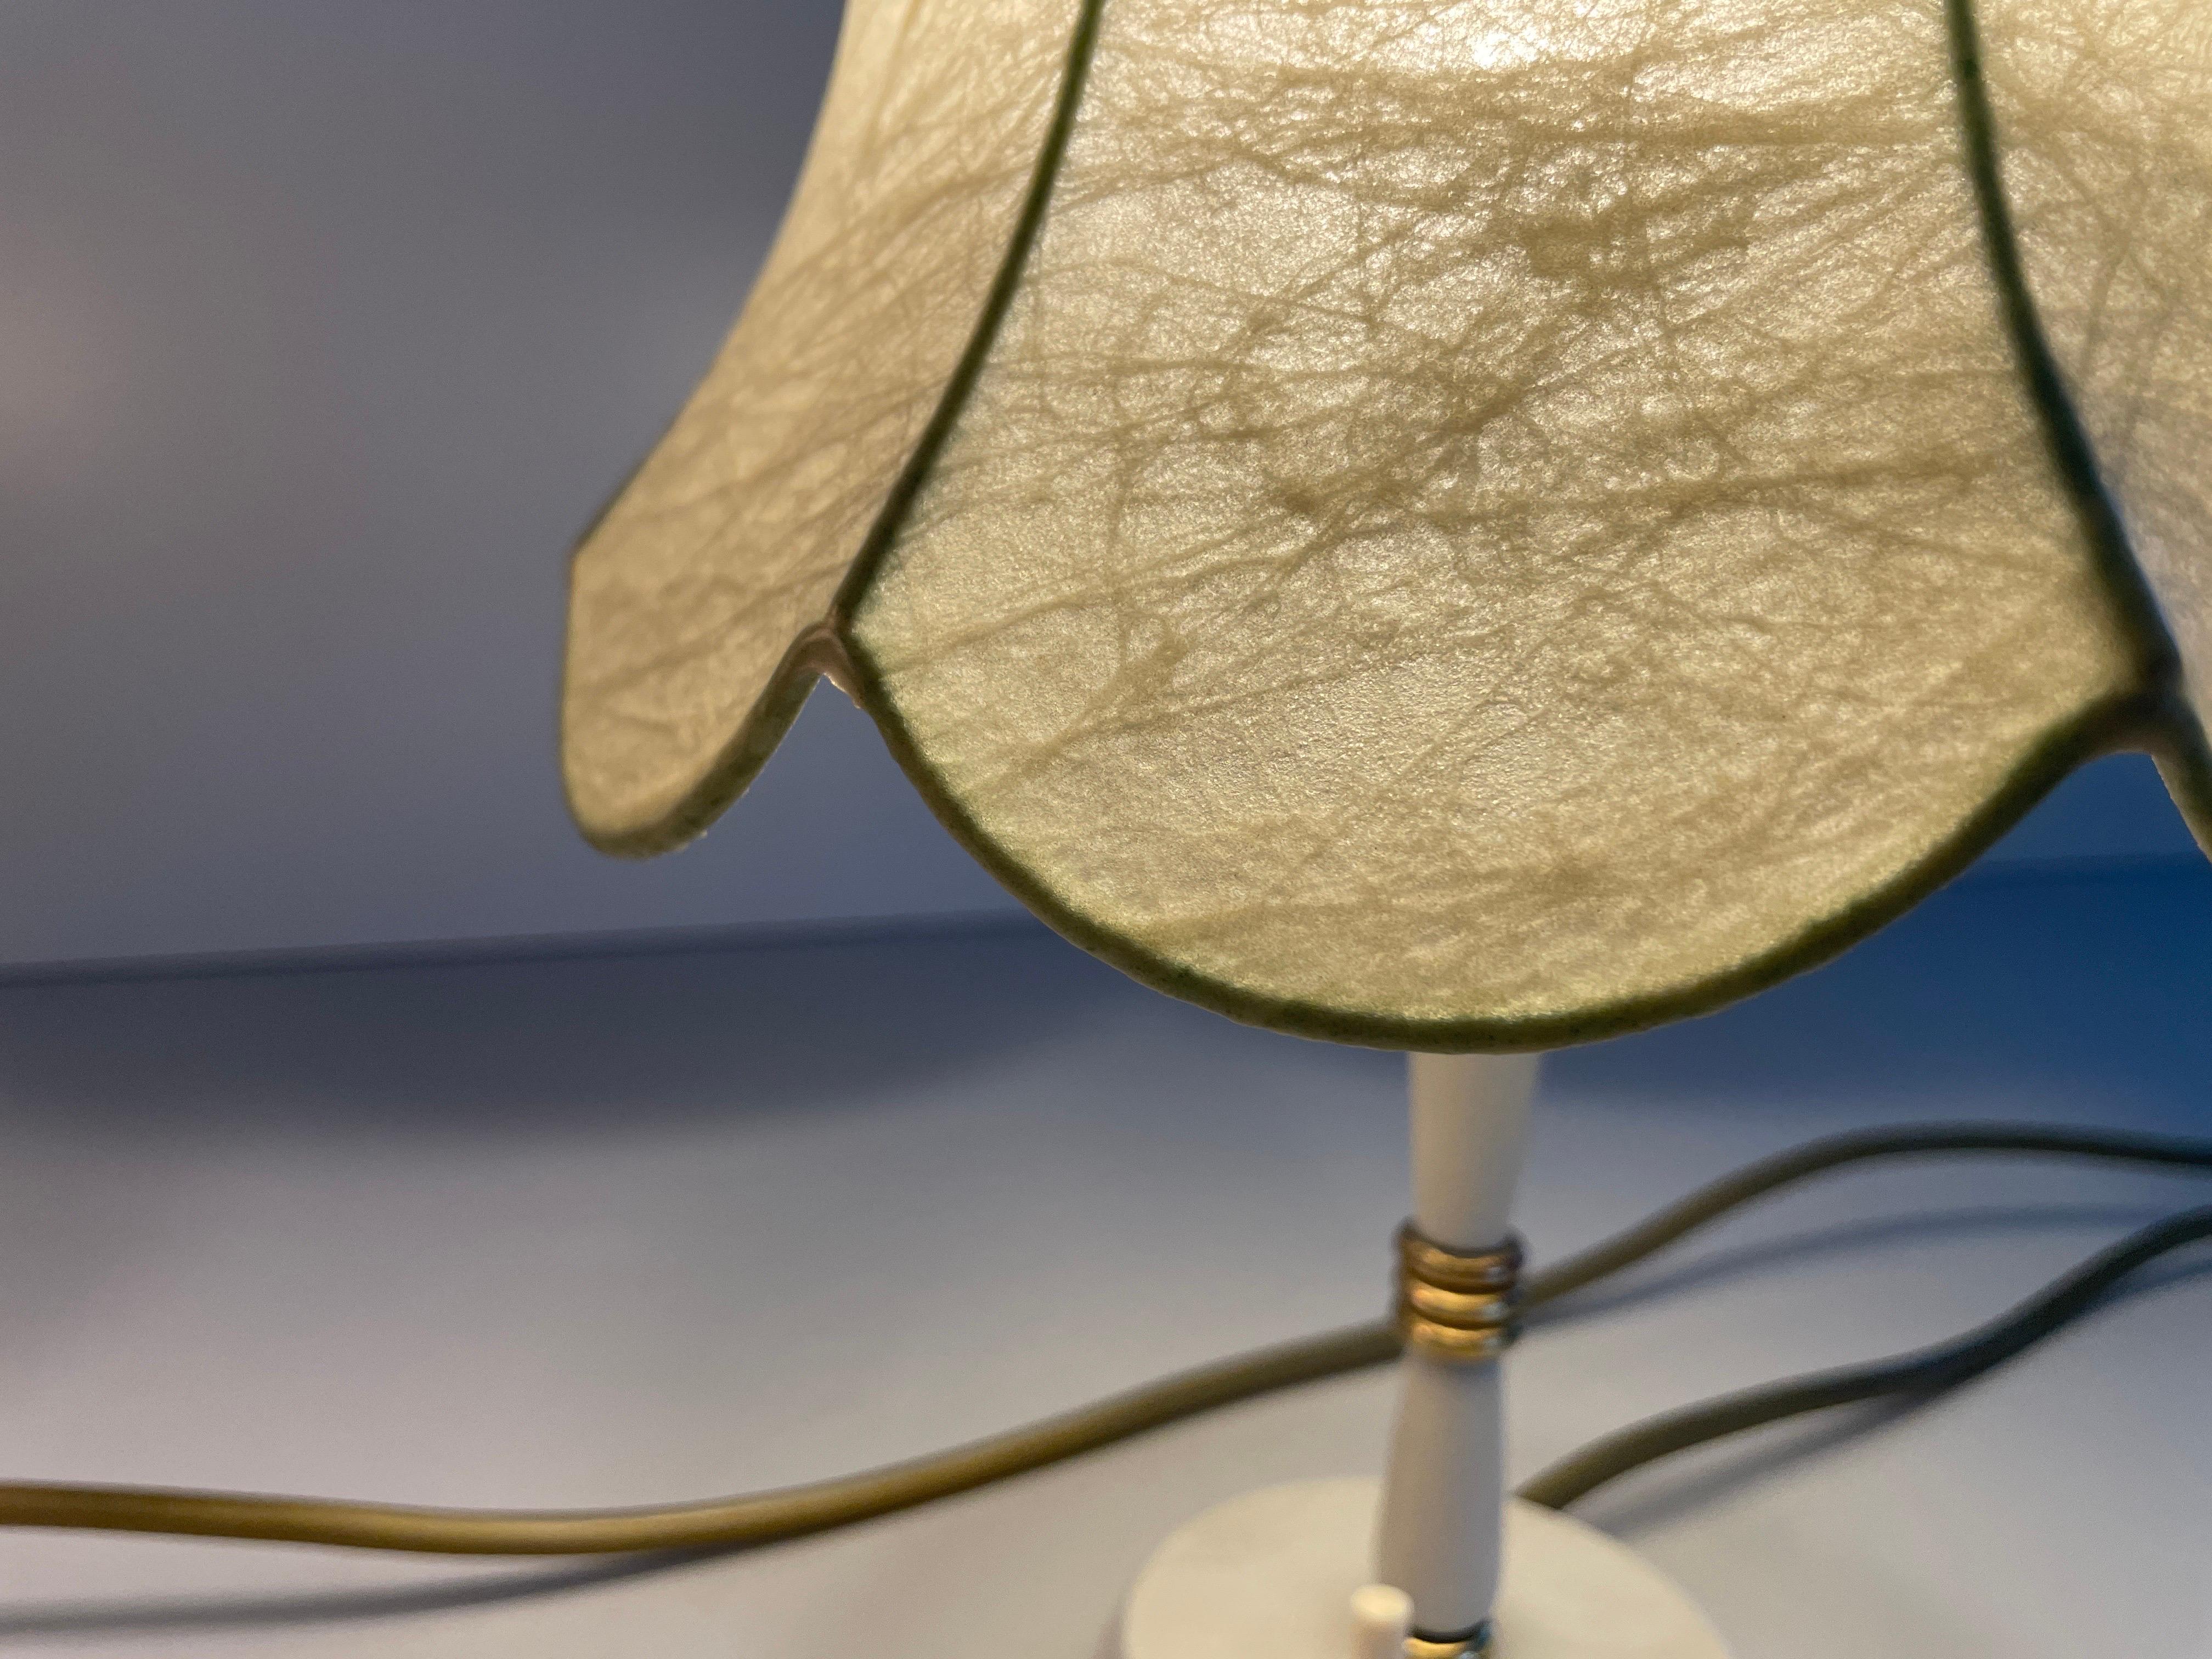 Cocoon Shade Metal Body Pair of Bedside Lamps by GOLDKANT, 1970s, Germany For Sale 11